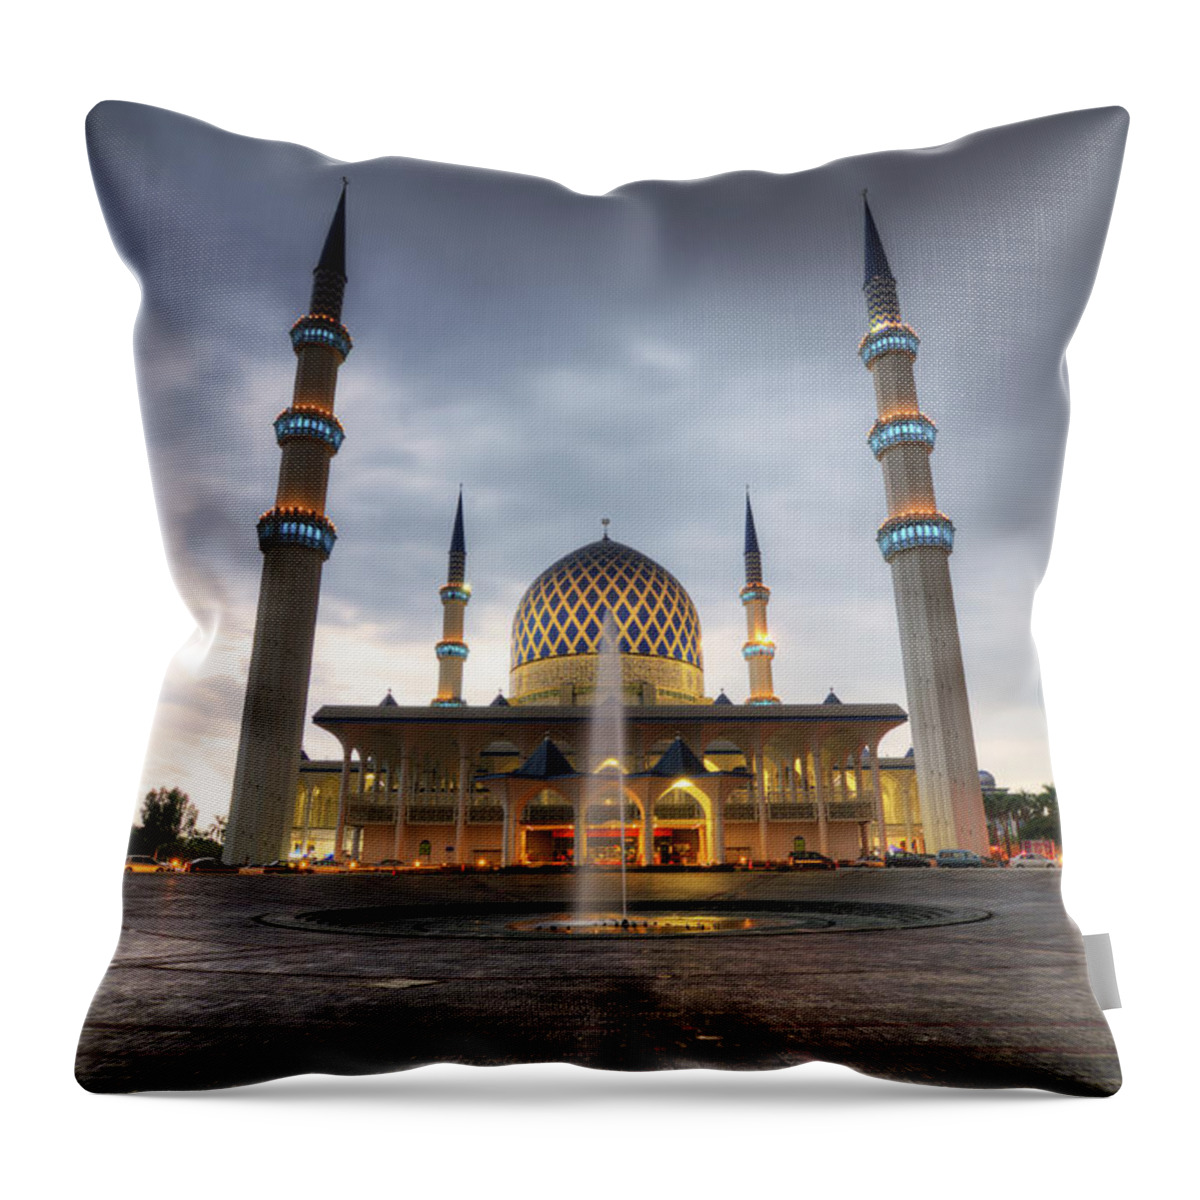 Arch Throw Pillow featuring the photograph Sultan Salahuddin Abdul Aziz Mosque by Mohamad Zaidi Photography